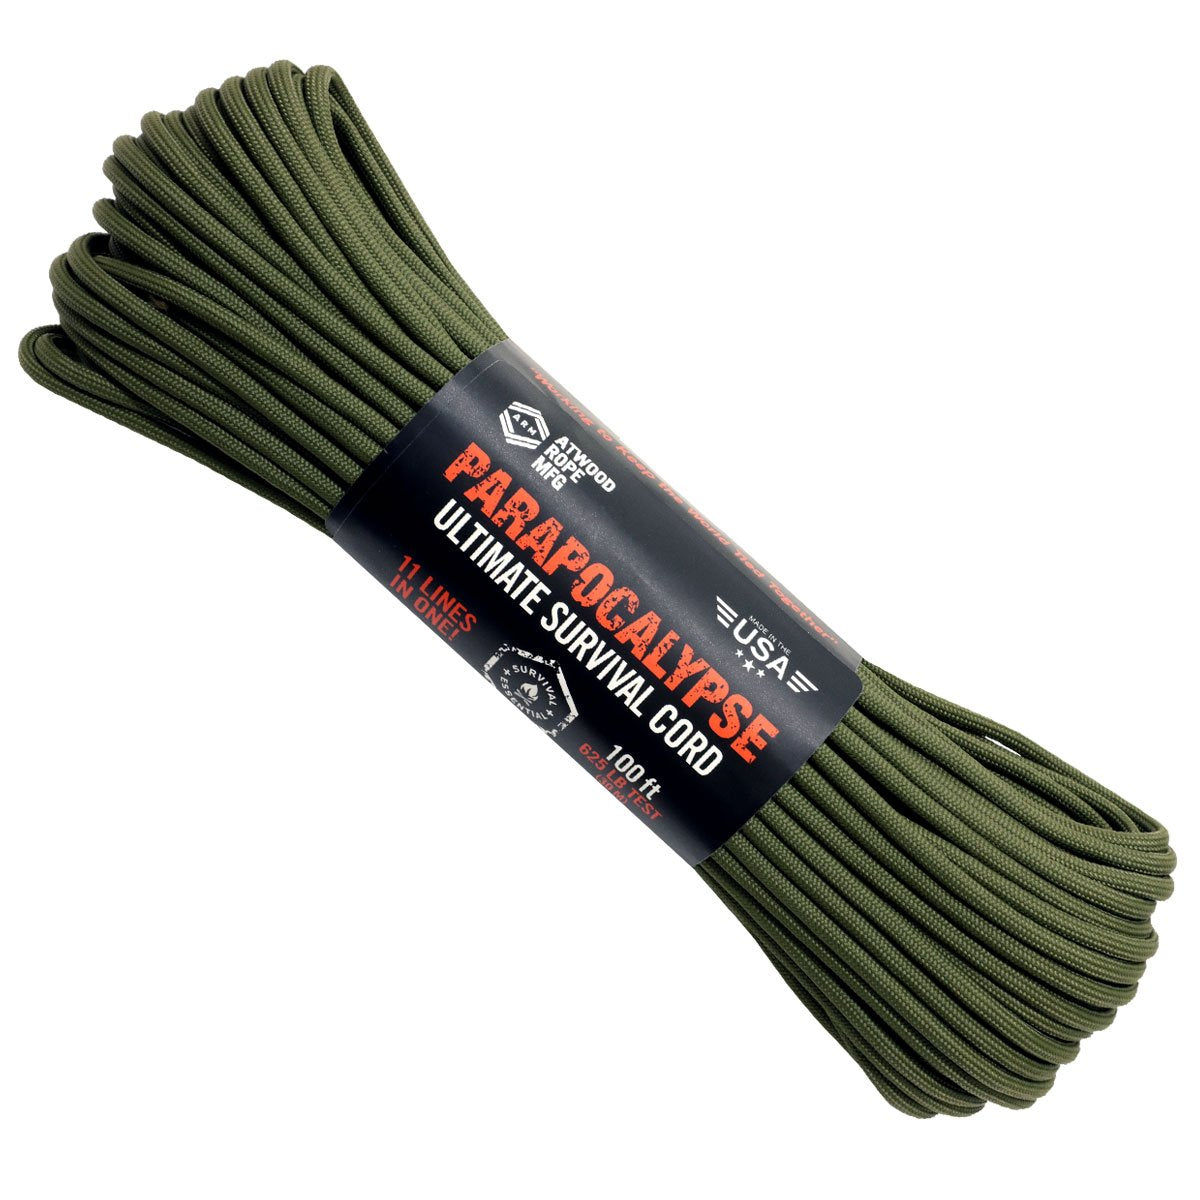 Atwood Rope MFG - Parapocalypse Survival Rope – Say Again Over